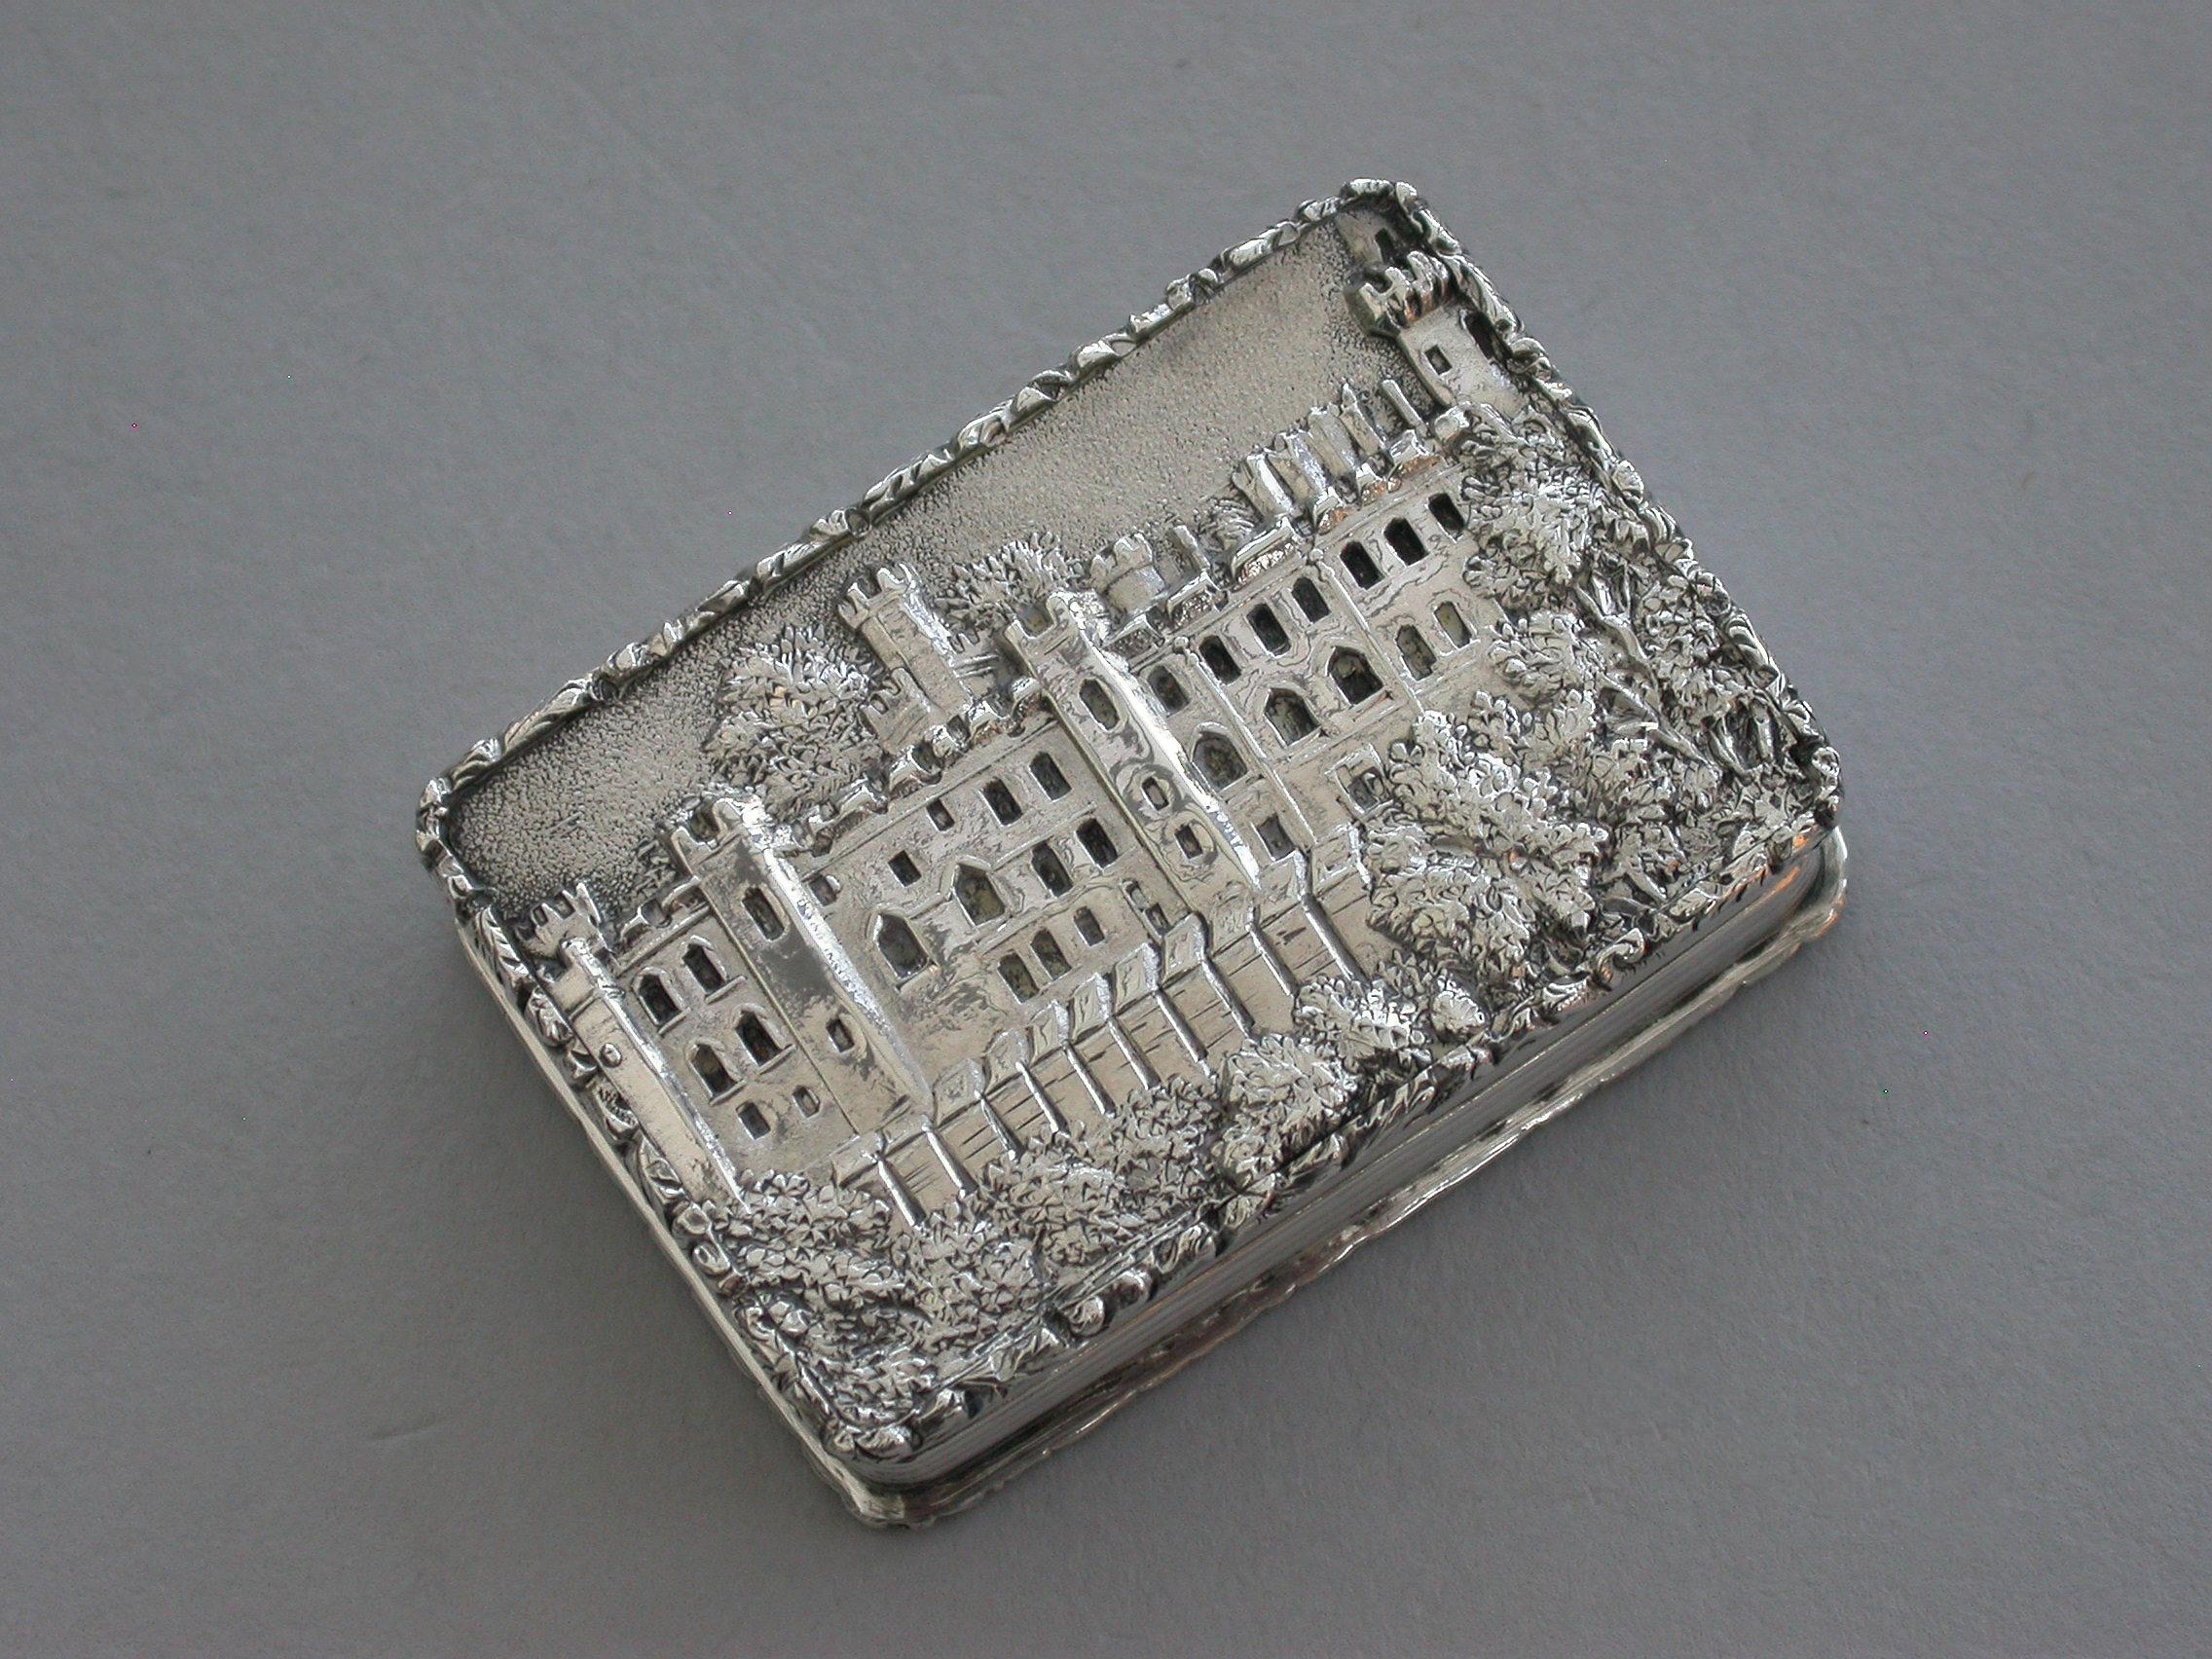 English Early Victorian Silver Castle-Top Vinaigrette - Warwick Castle By N Mills 1838 For Sale